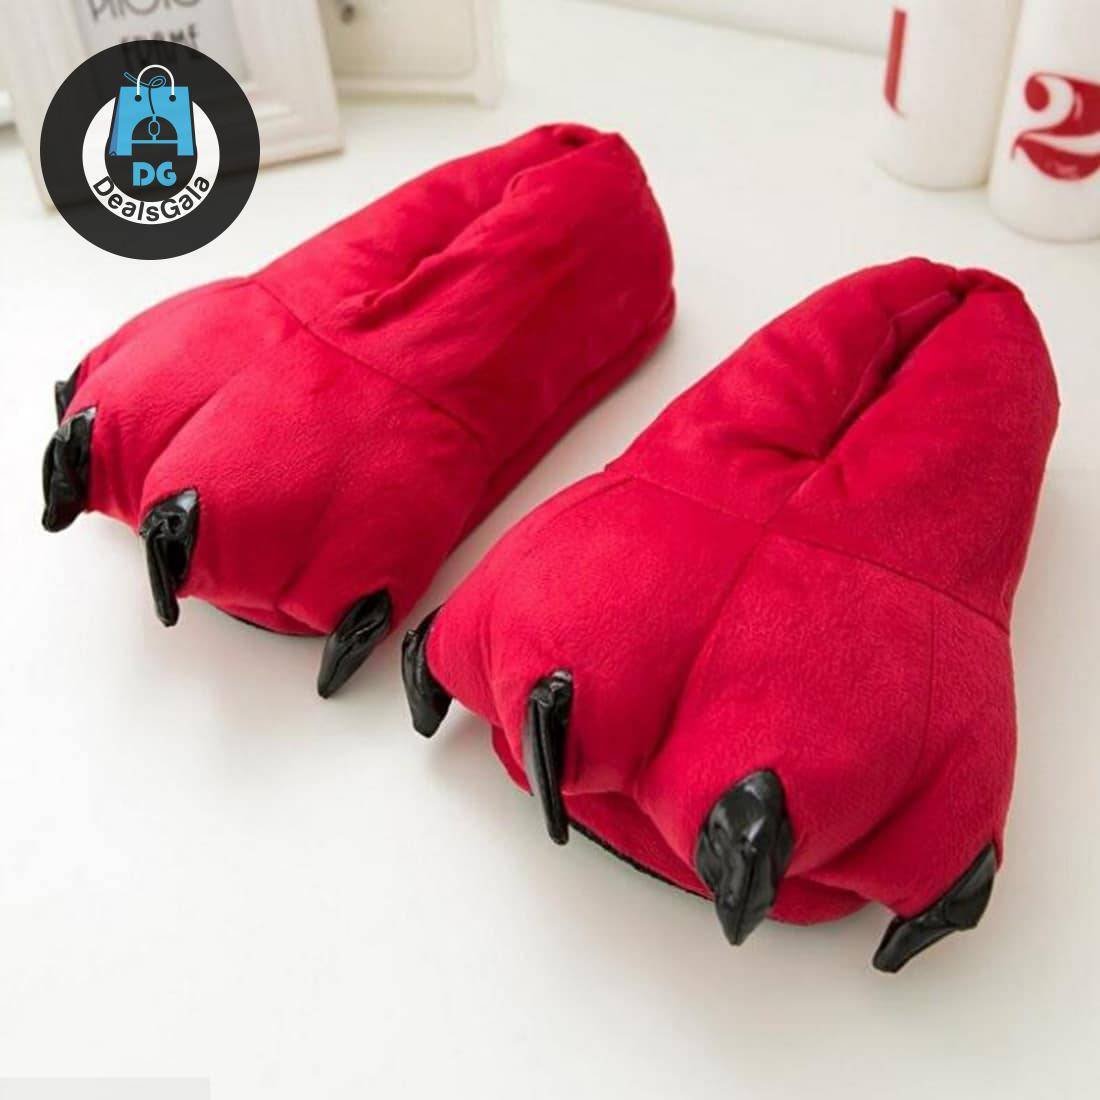 Unisex Winter Soft Paw Shoes Slippers cb5feb1b7314637725a2e7: Black|Blue|Gray|Green|pink|Red|Yellow